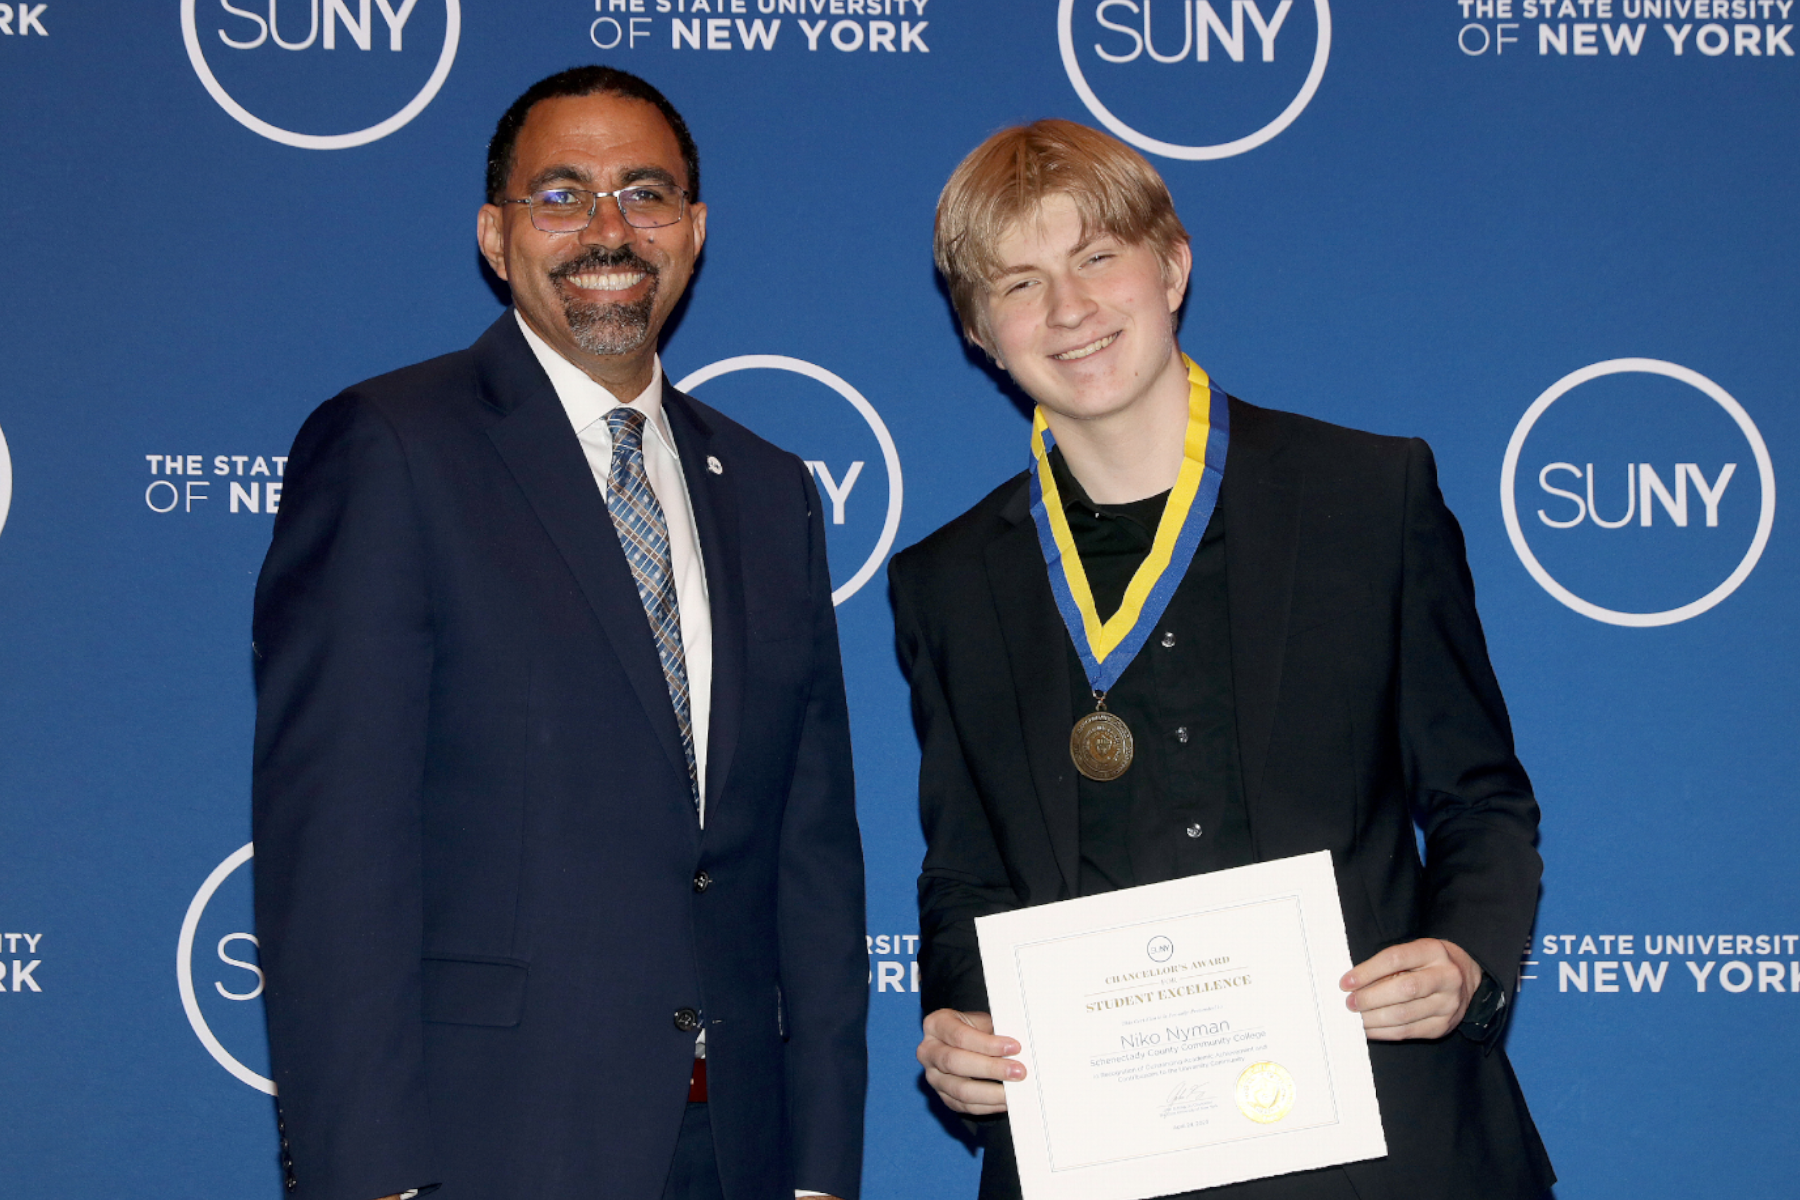 SUNY Chancellor John B. King Jr. standing with Niko Nyman, smiling in front of SUNY backdrop